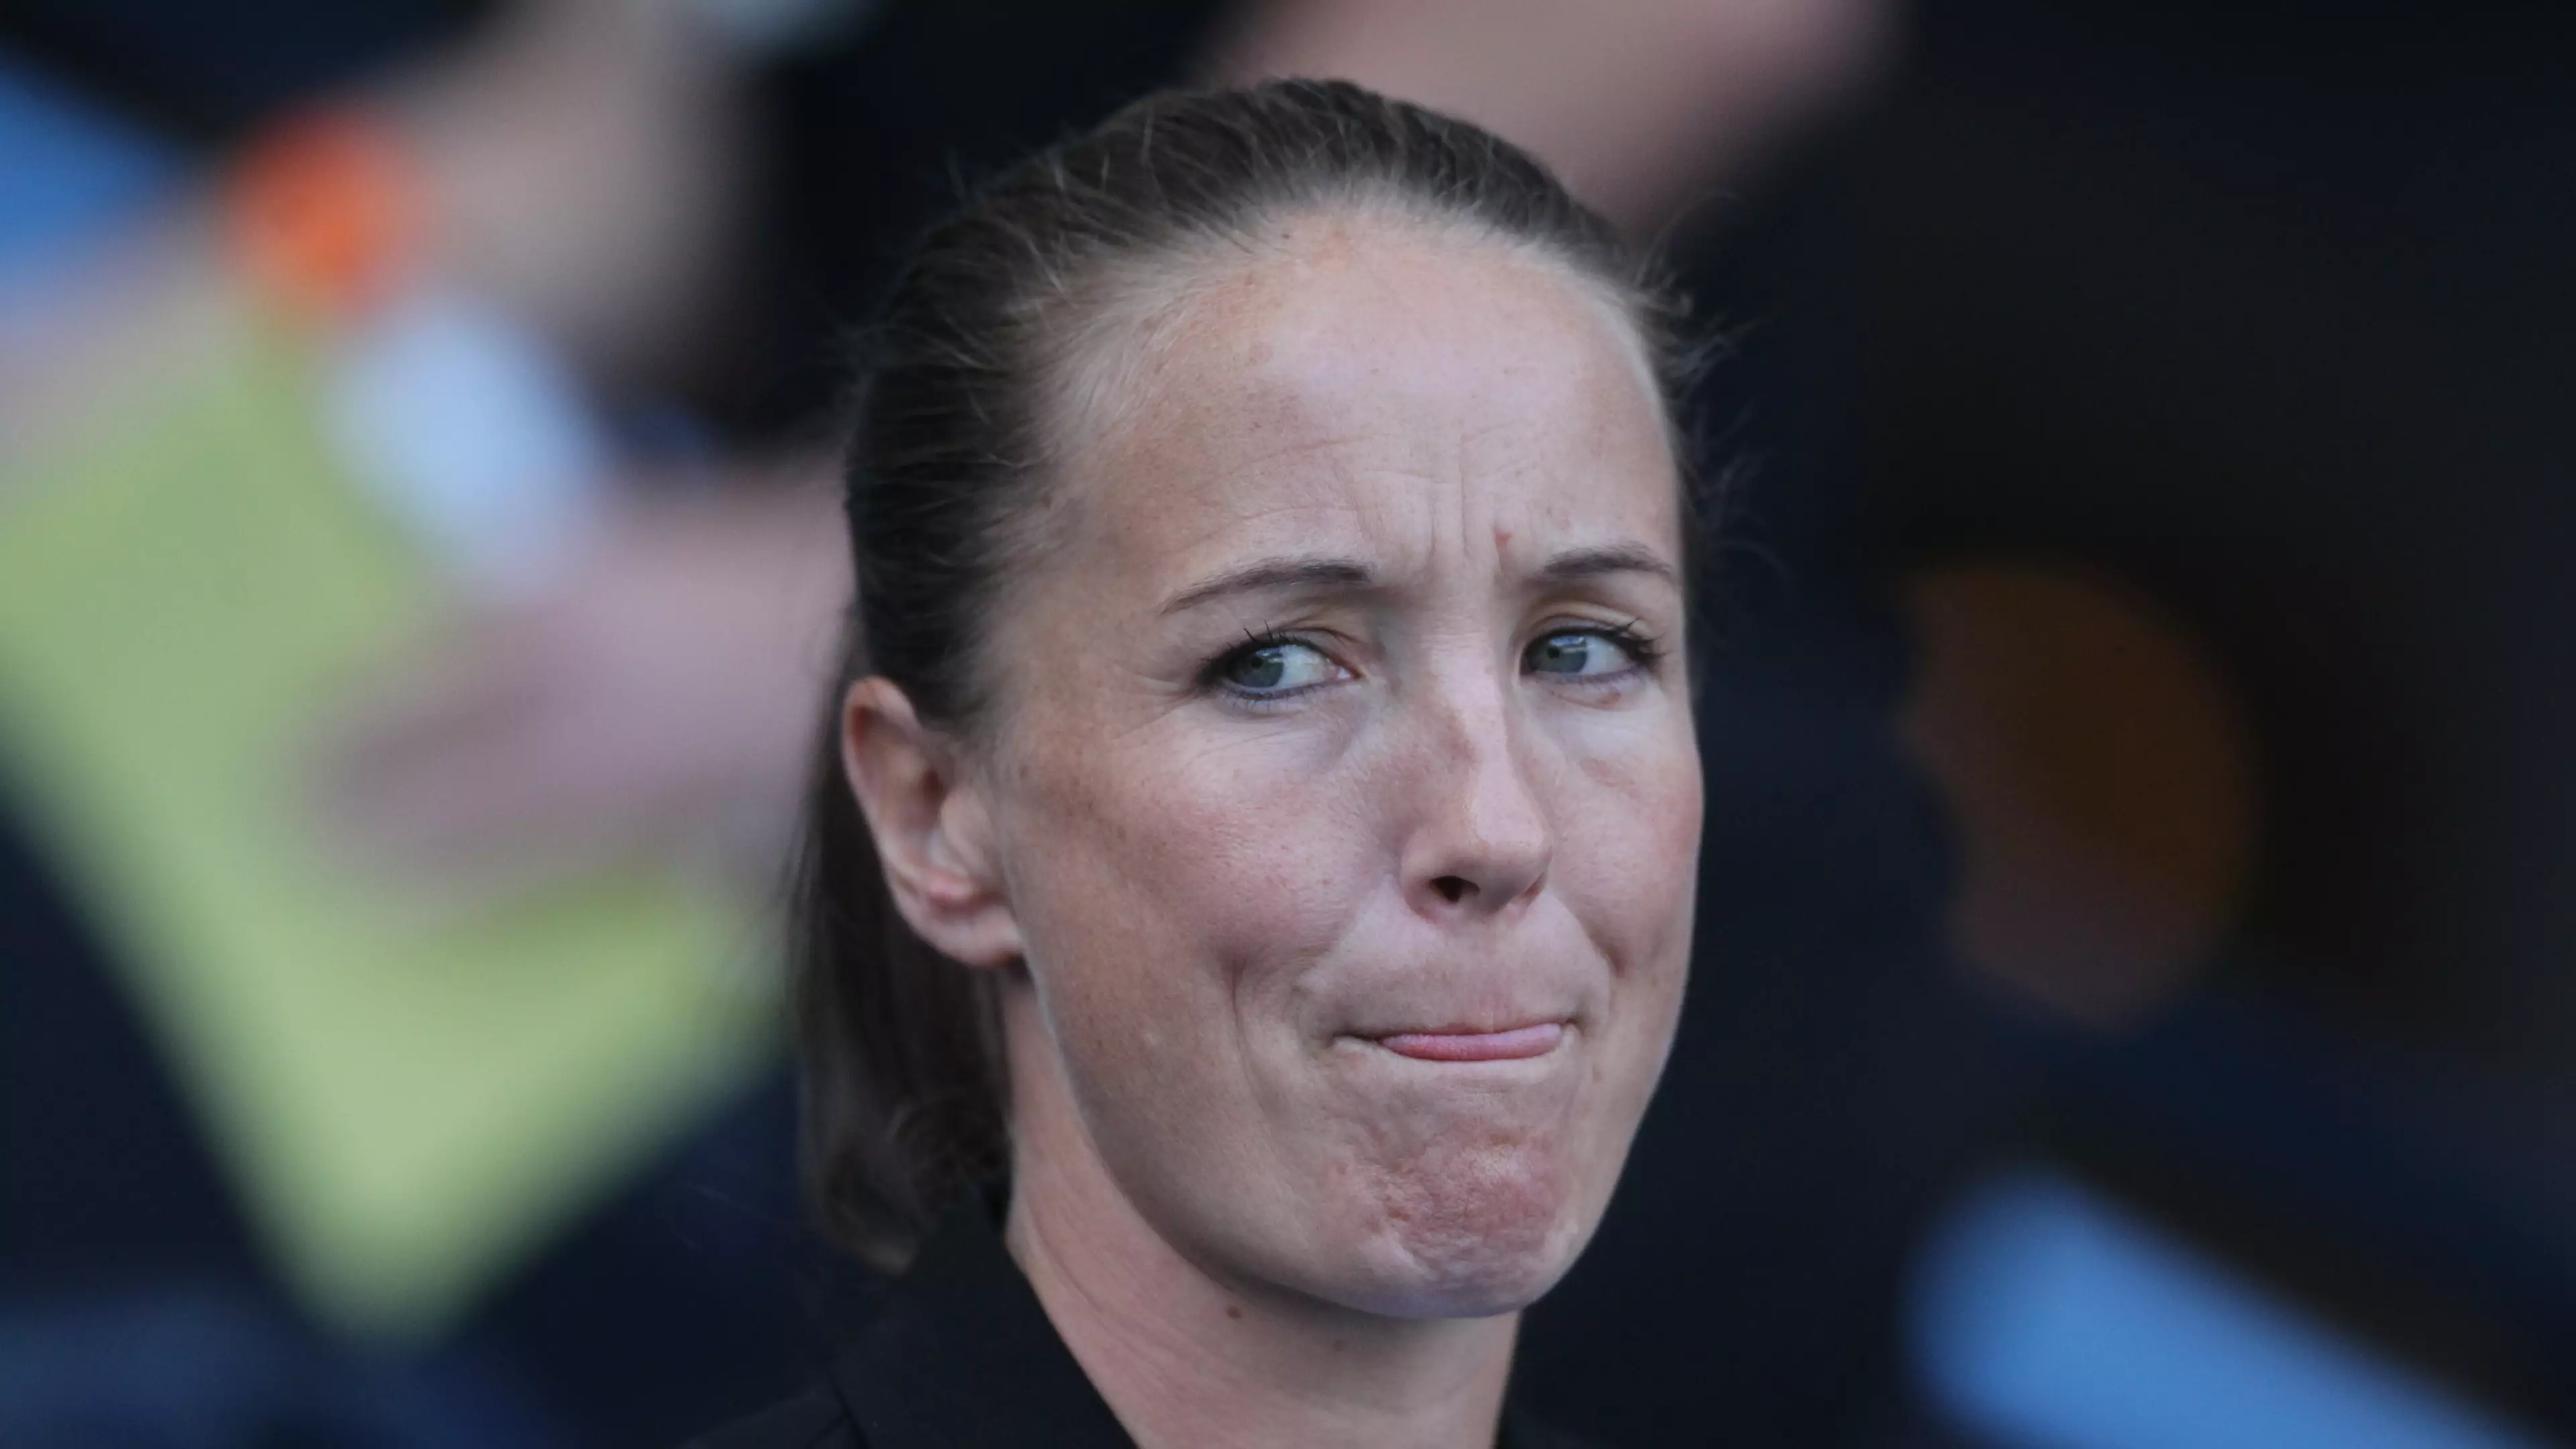 Casey Stoney Expresses Frustrations Over Female Athletes Getting Commercial Deals 'Based On Looks'